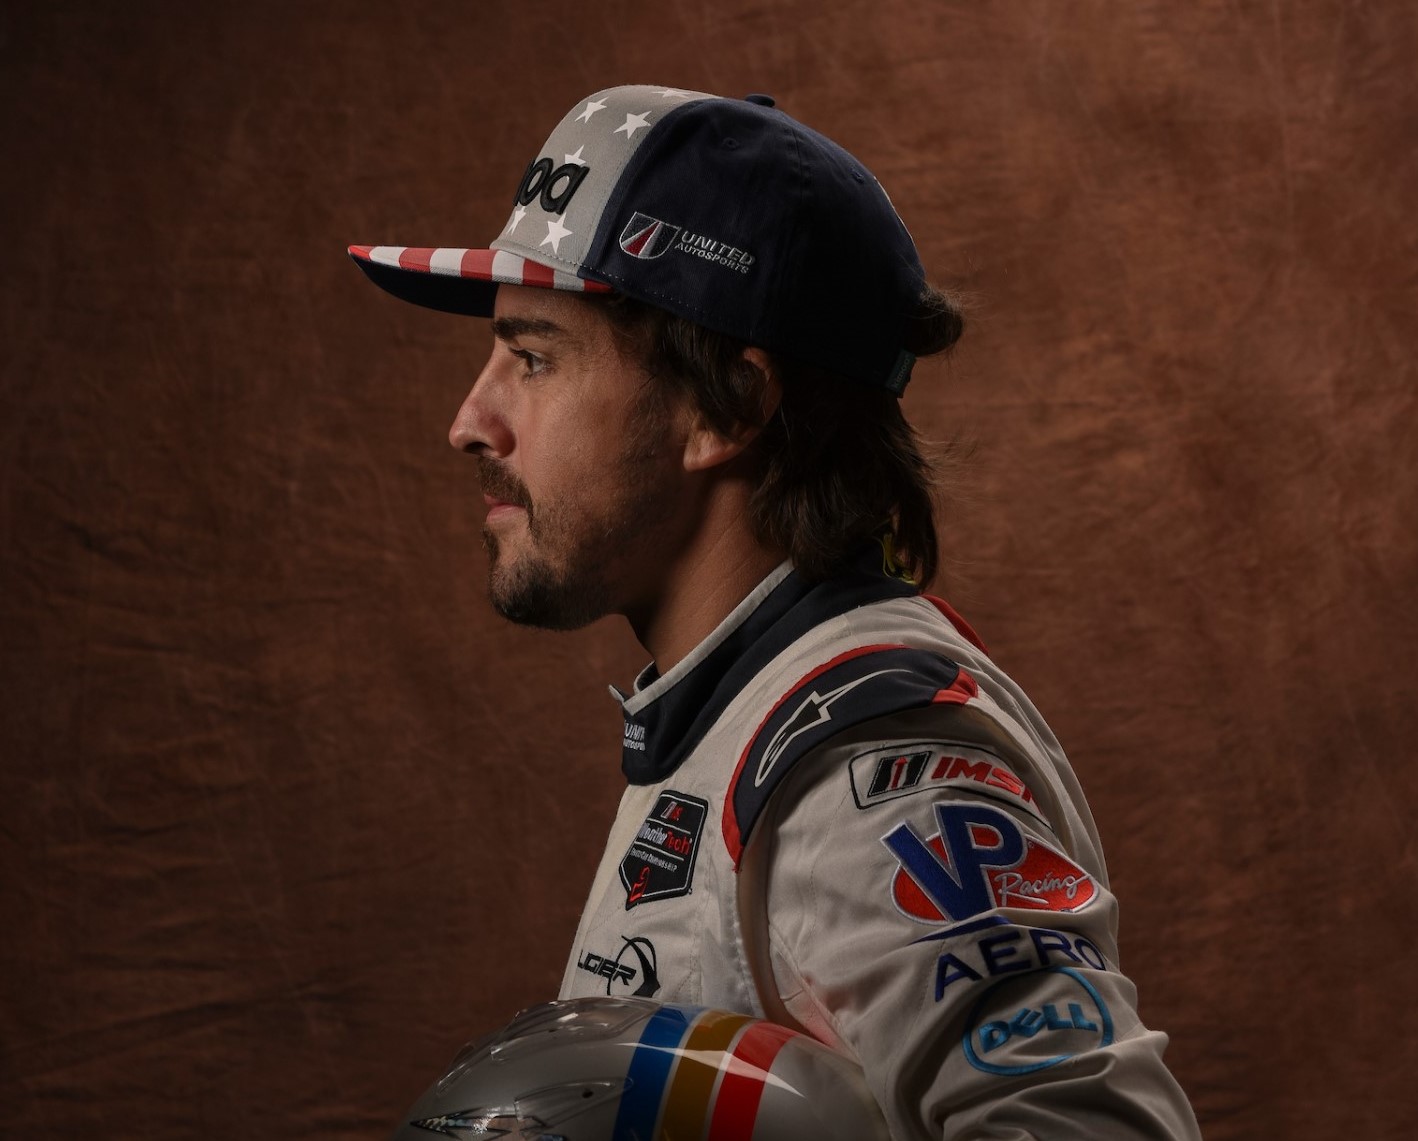 Fernando Alonso will be back for another try at the Rolex 24